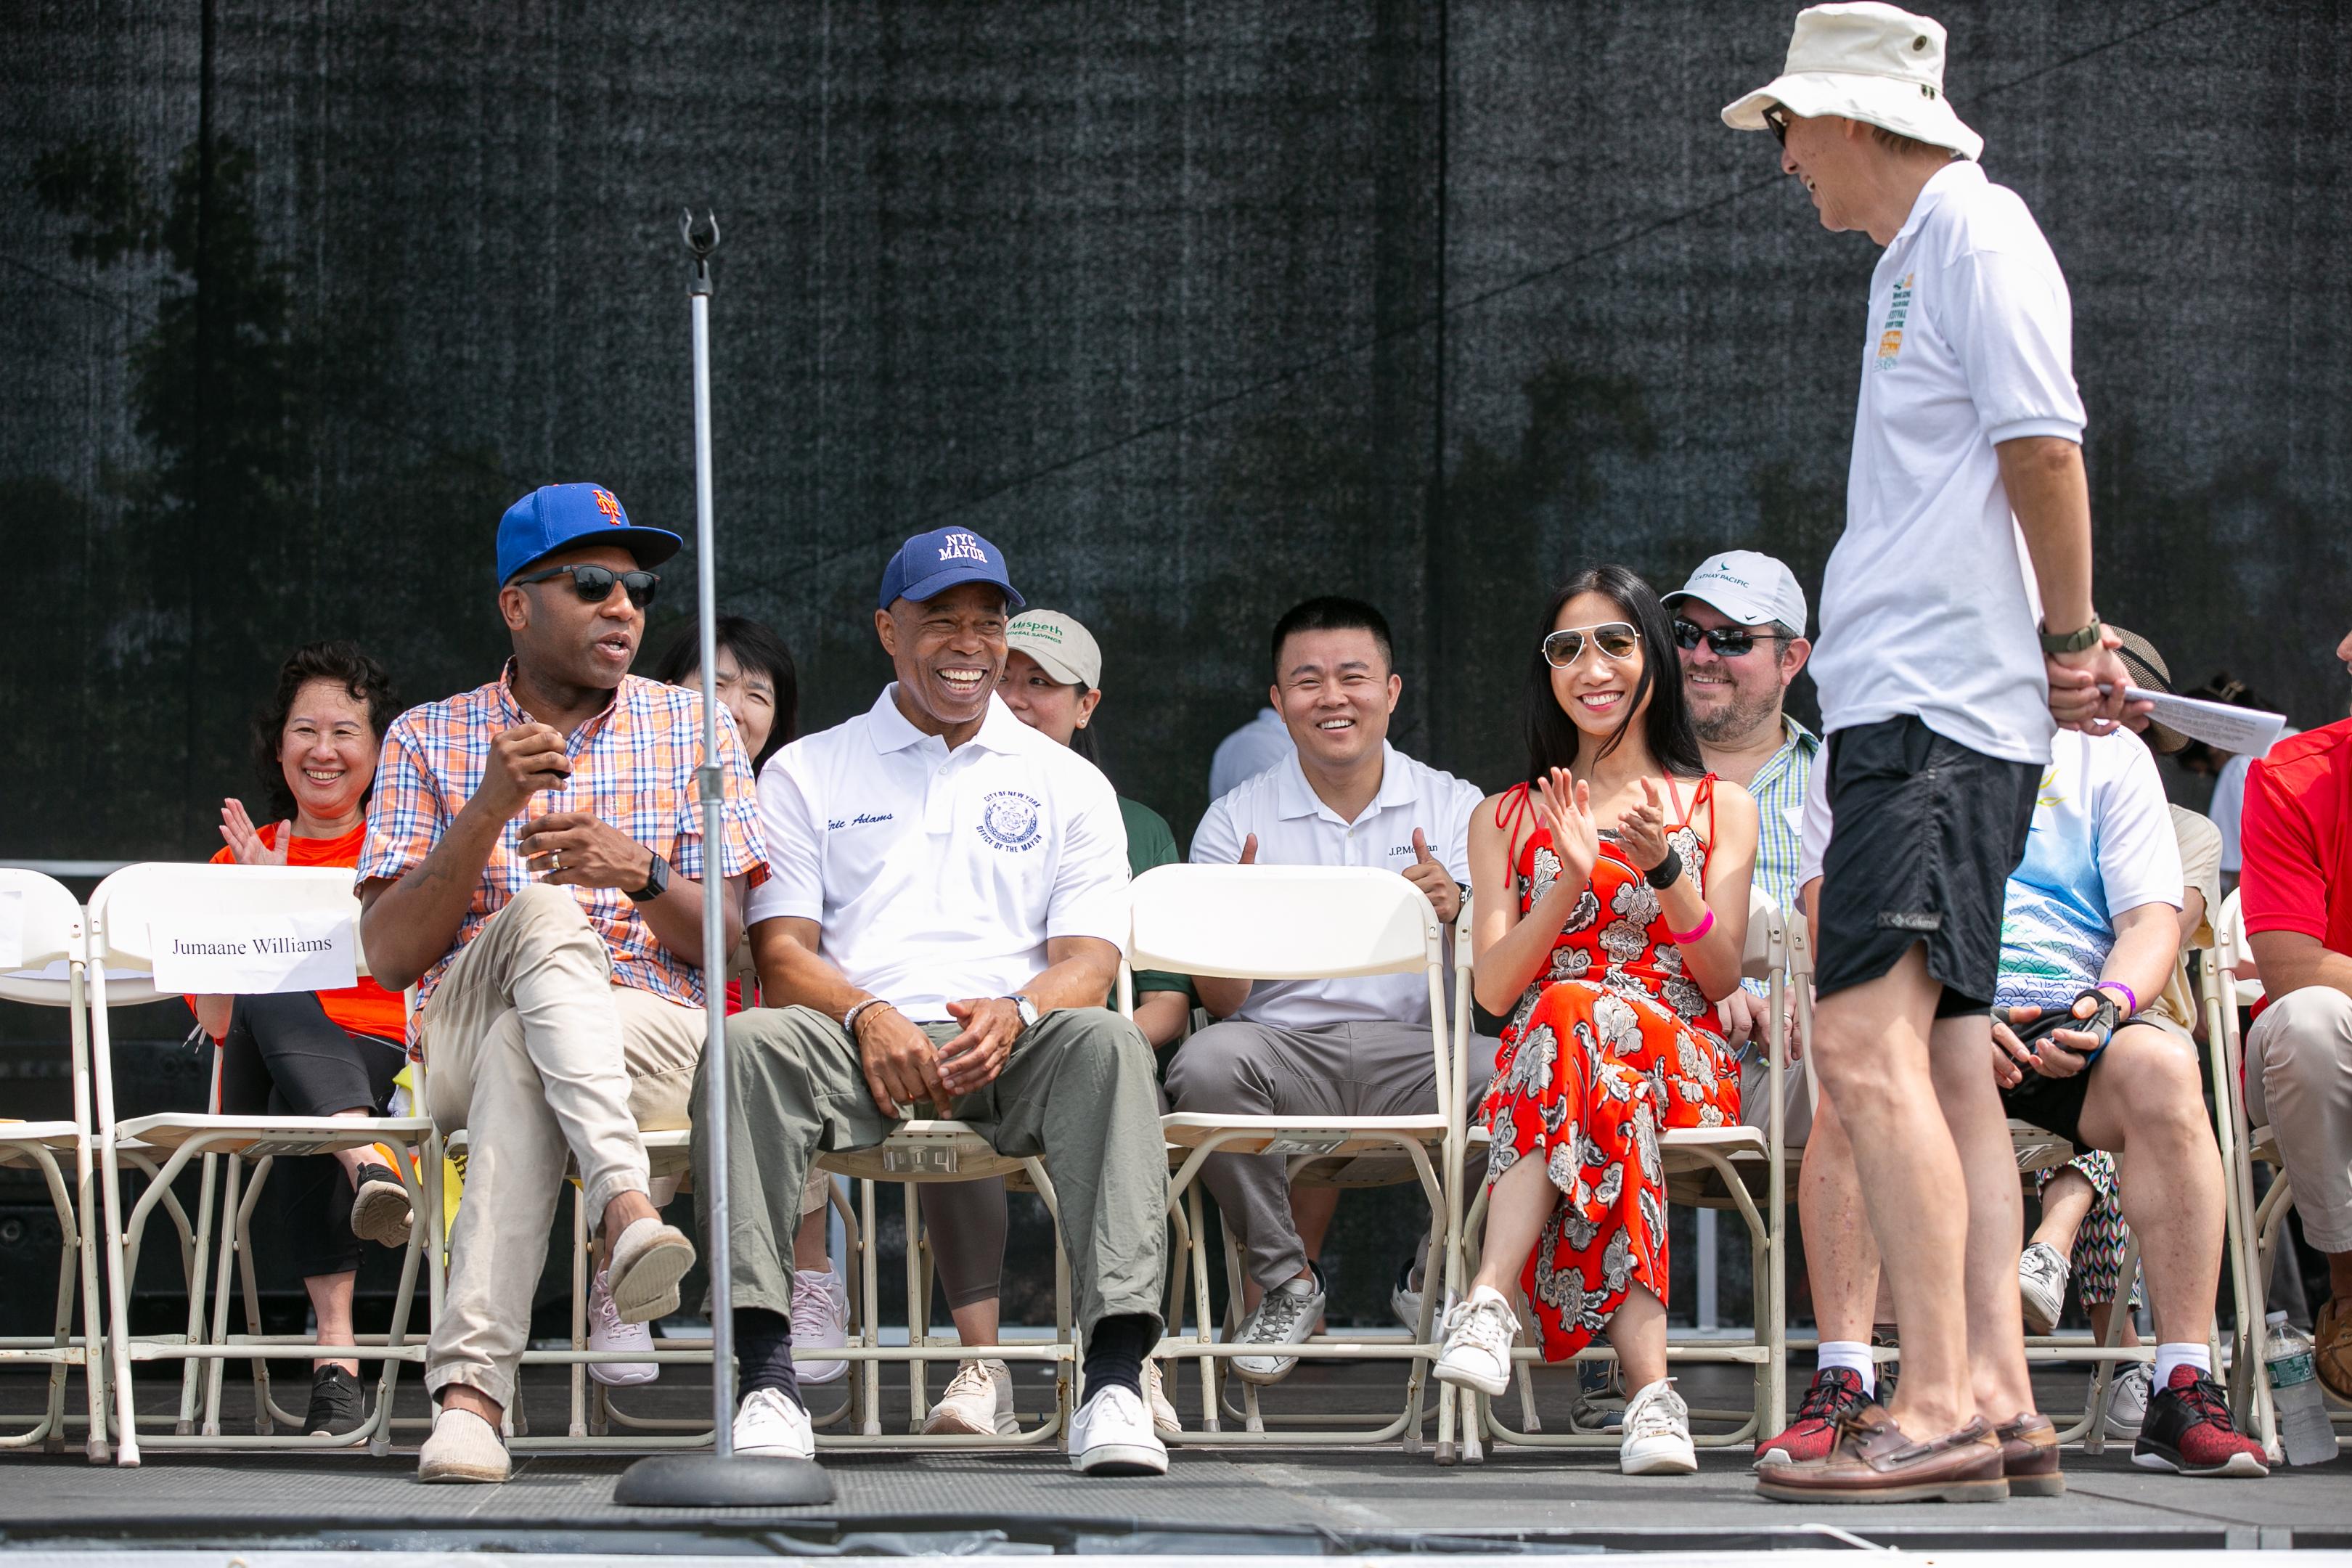 The 31st edition of the Hong Kong Dragon Boat Festival in New York was held at the Flushing Meadows Corona Park on August 12 and 13 (New York time). Among the guests officiating at opening ceremony on August 12 (New York time) are (front row, from left) the President of Borough of Queens, Mr Donovan Richards; the Mayor of New York City, Mr Eric Adams; and the Director of Hong Kong Economic and Trade Office in New York, Ms Candy Nip.